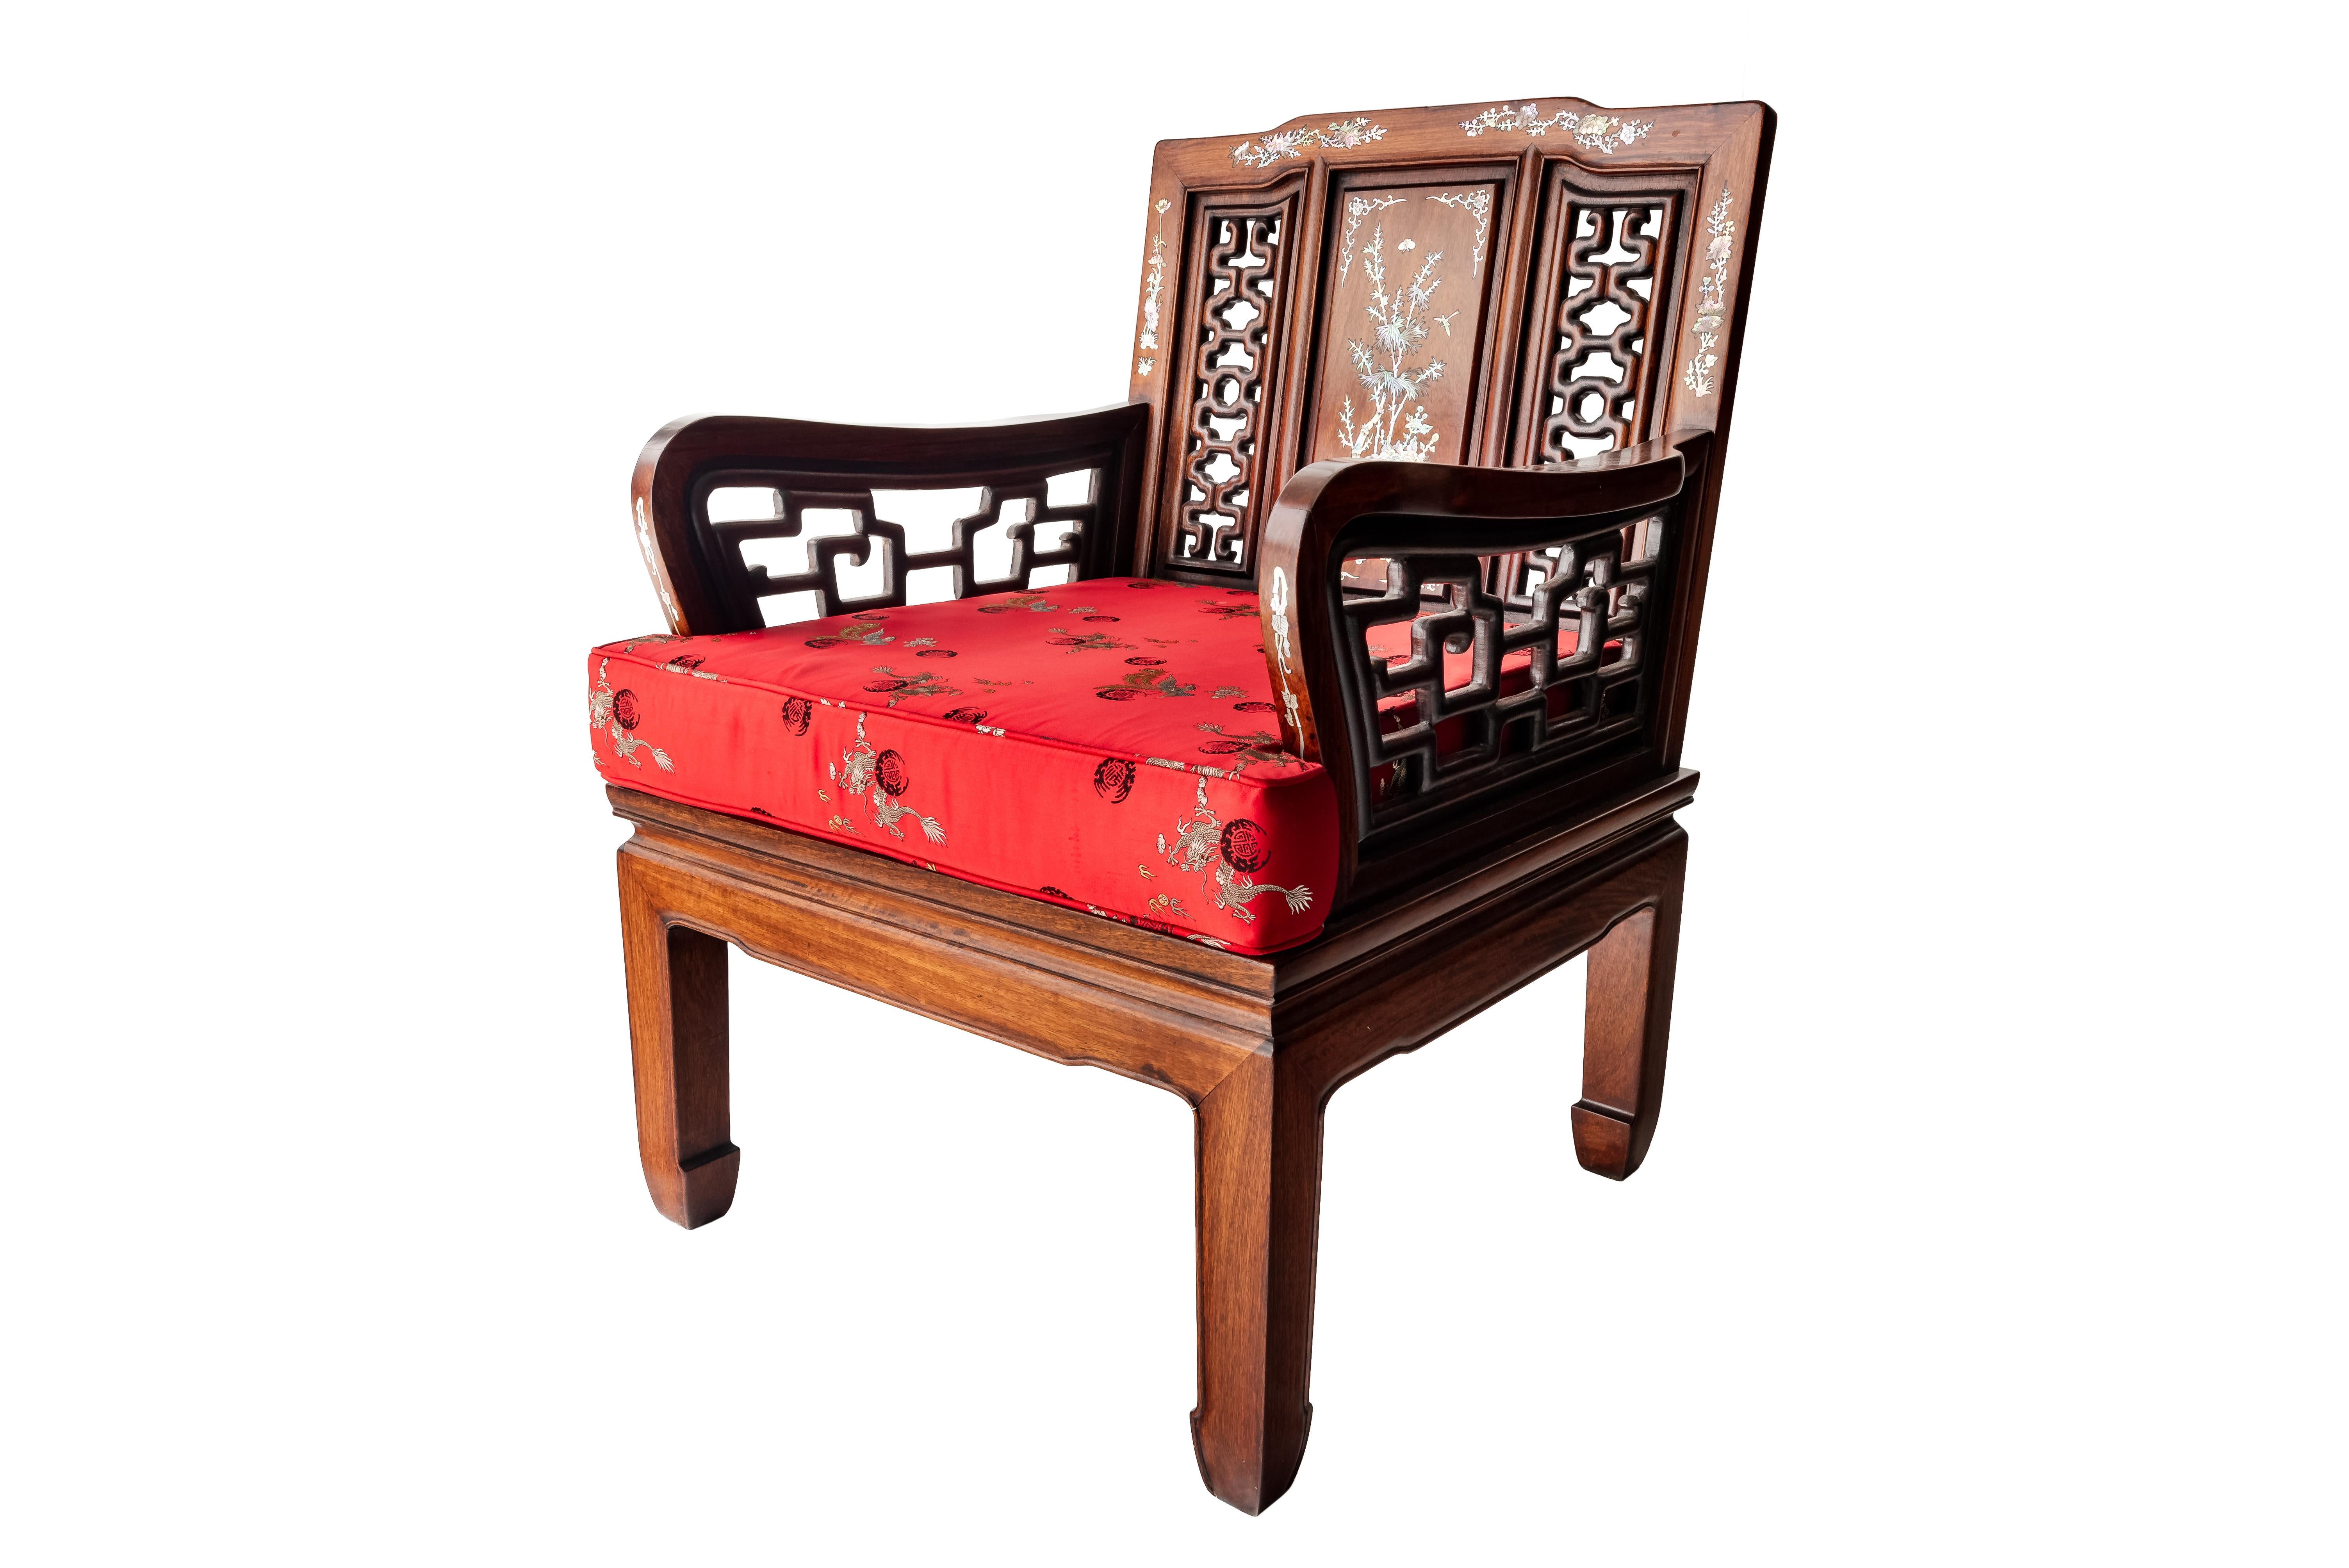 19th Century Indo-Portuguese Rosewood Mother of Pearl Inlay Lounge Chairs, 1890 (Qing-Dynastie)